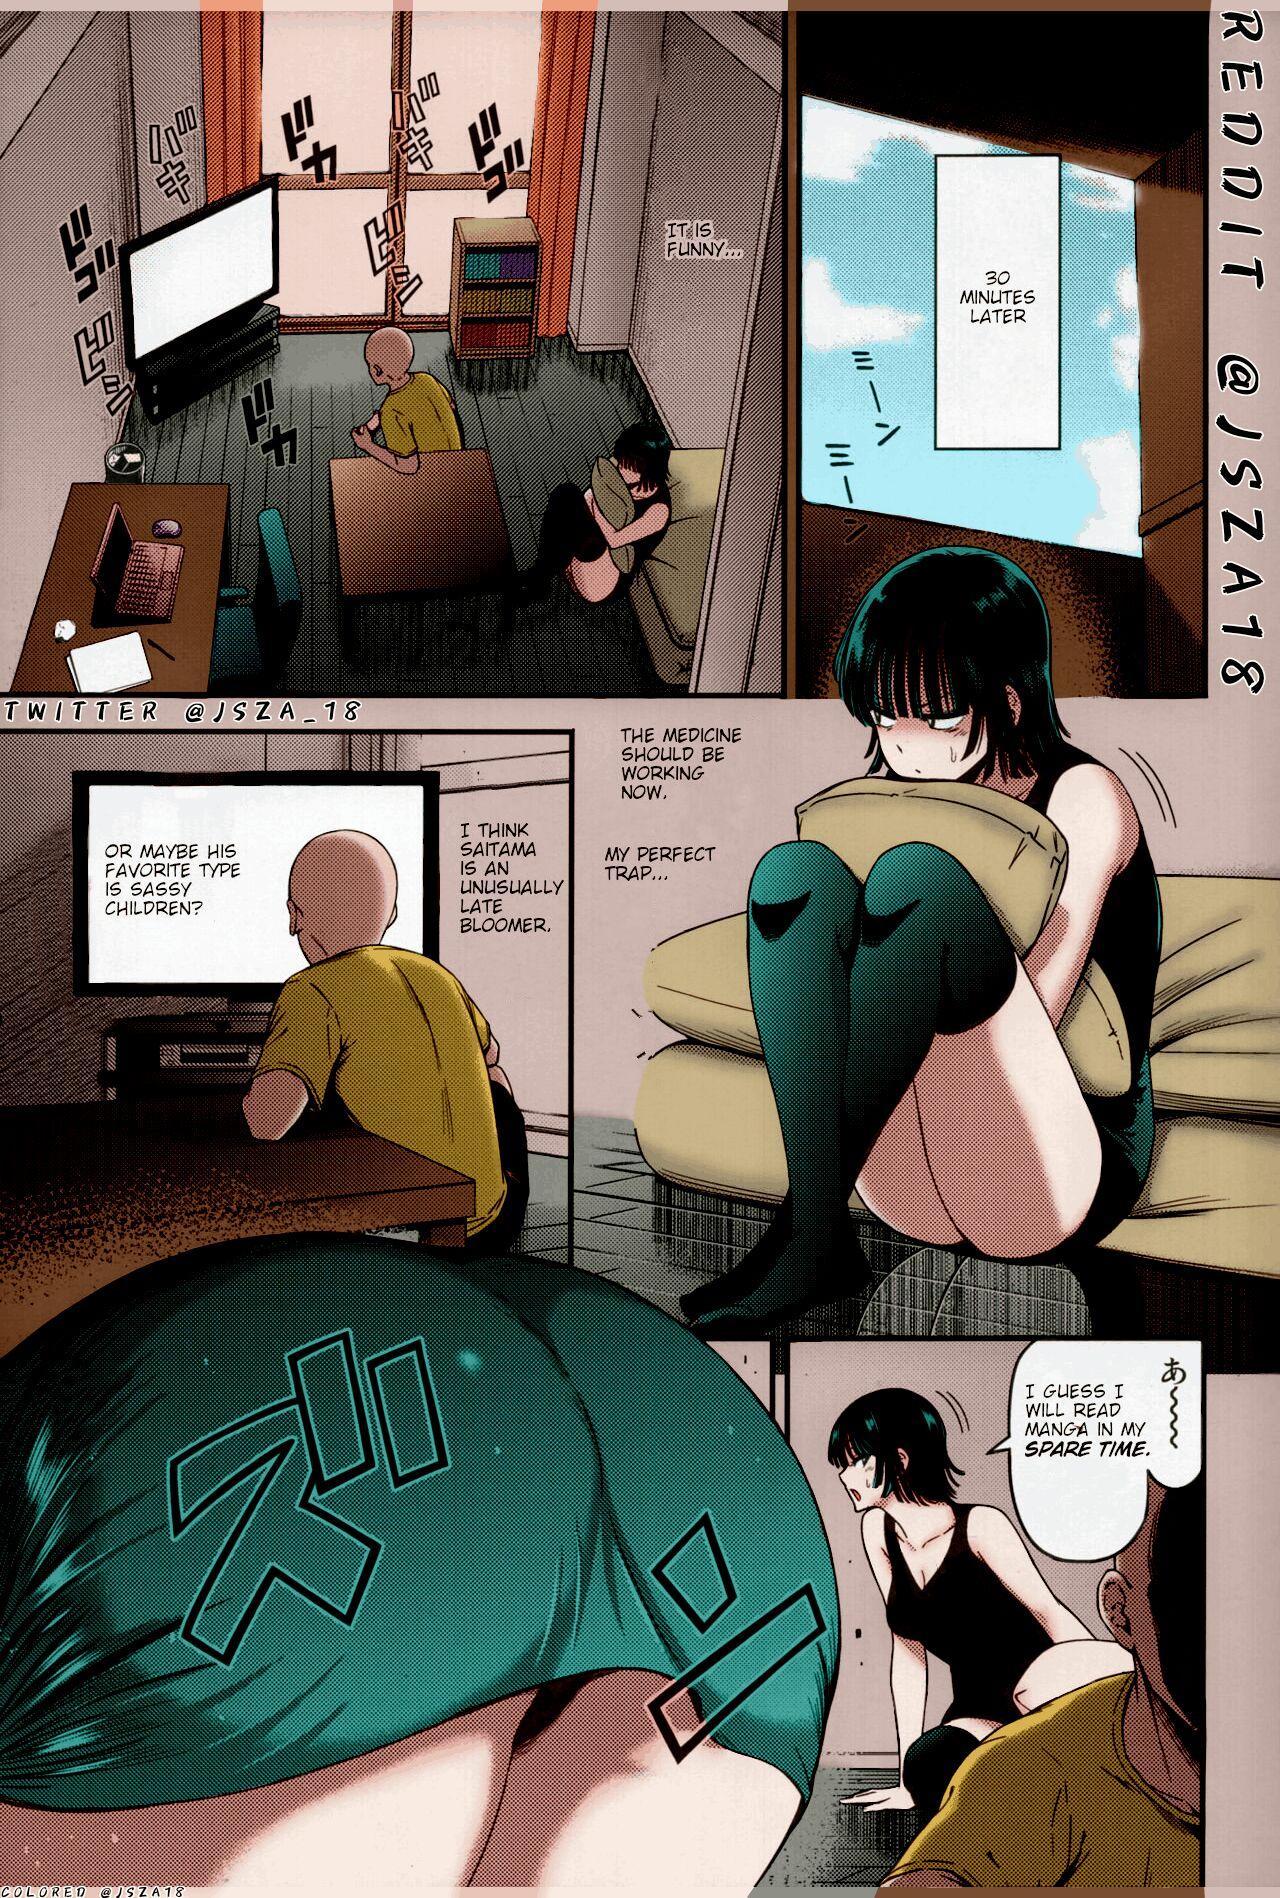 Amateurs Gone ONE-HURRICANE 6 - One punch man Joi - Page 6